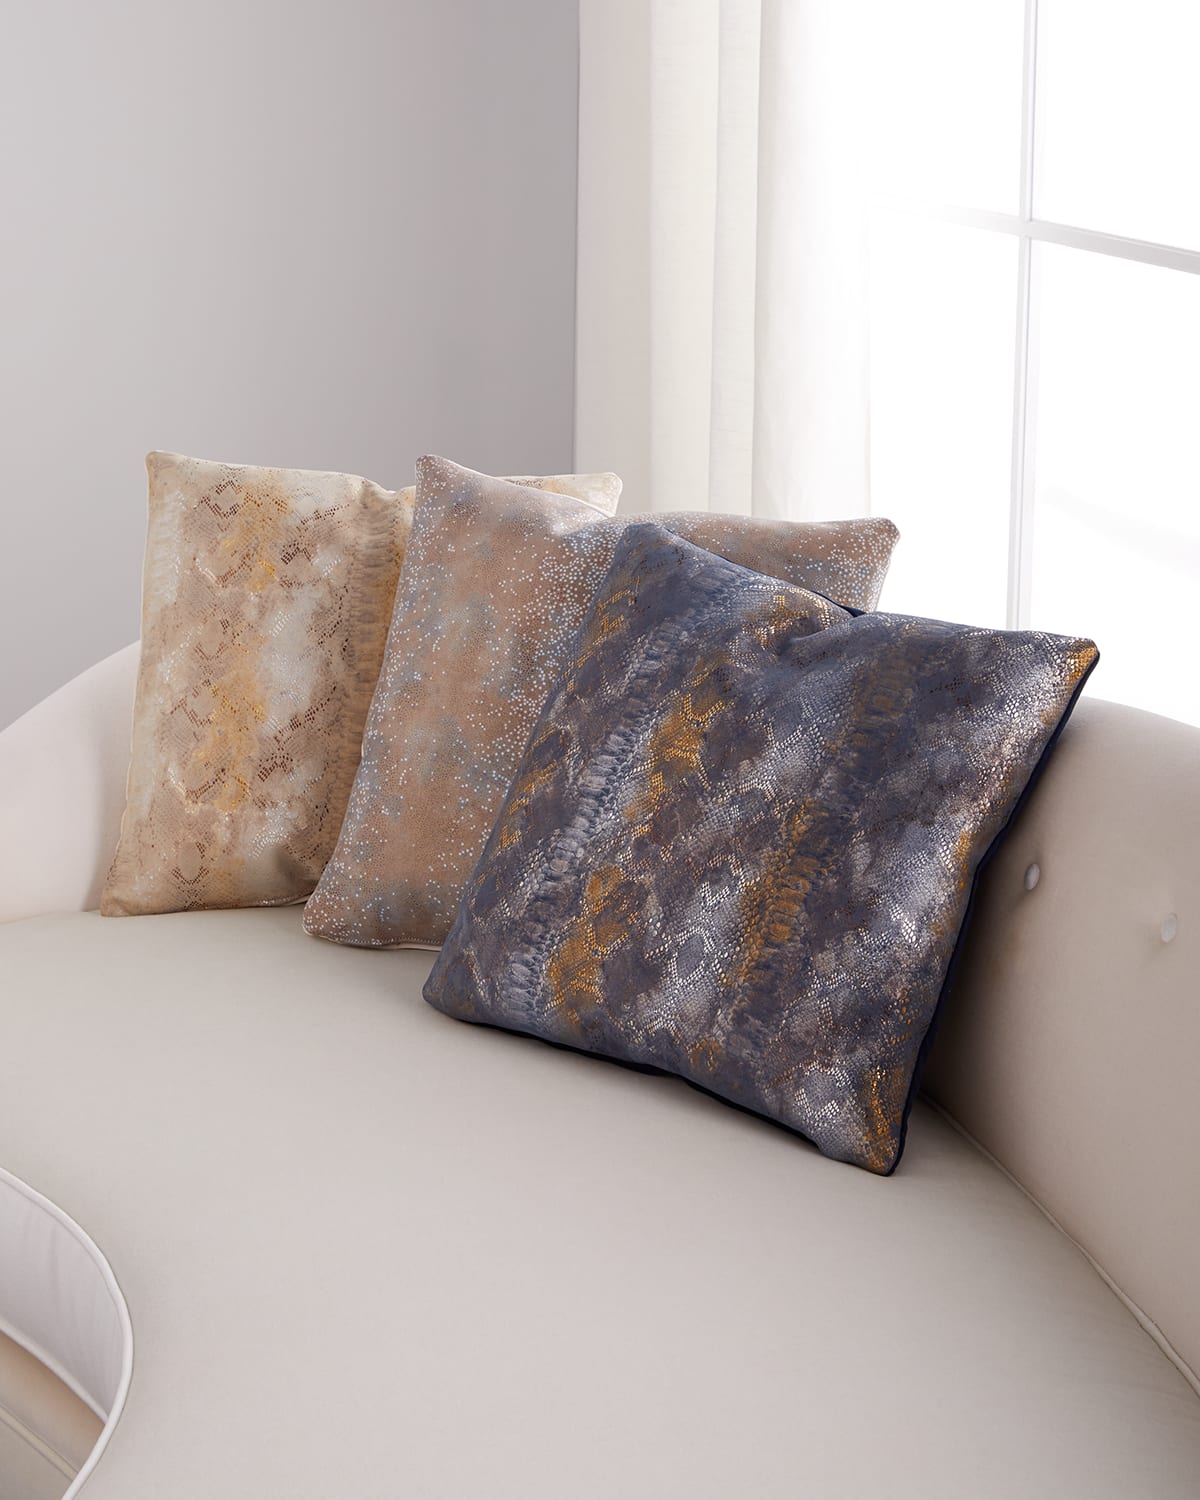 Massoud Oil Printed Suede Pillow, 19"sq.